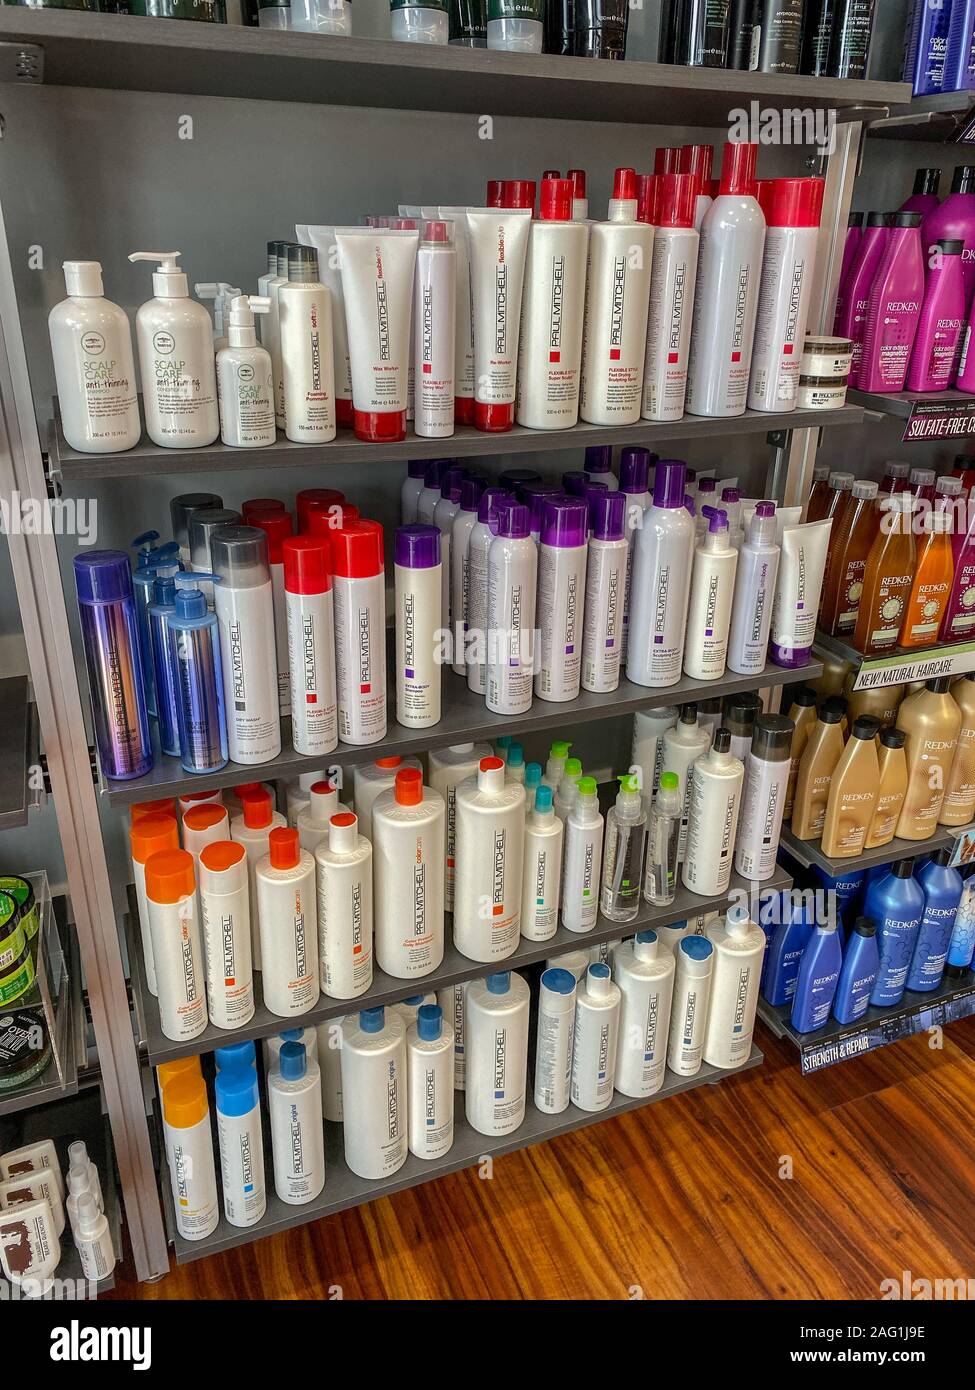 Orlando,FL/USA-12/13/19: Shelves of Paul Mitchell hair shampoo, conditioner  and styling products at a Supercuts Hair Salon Stock Photo - Alamy